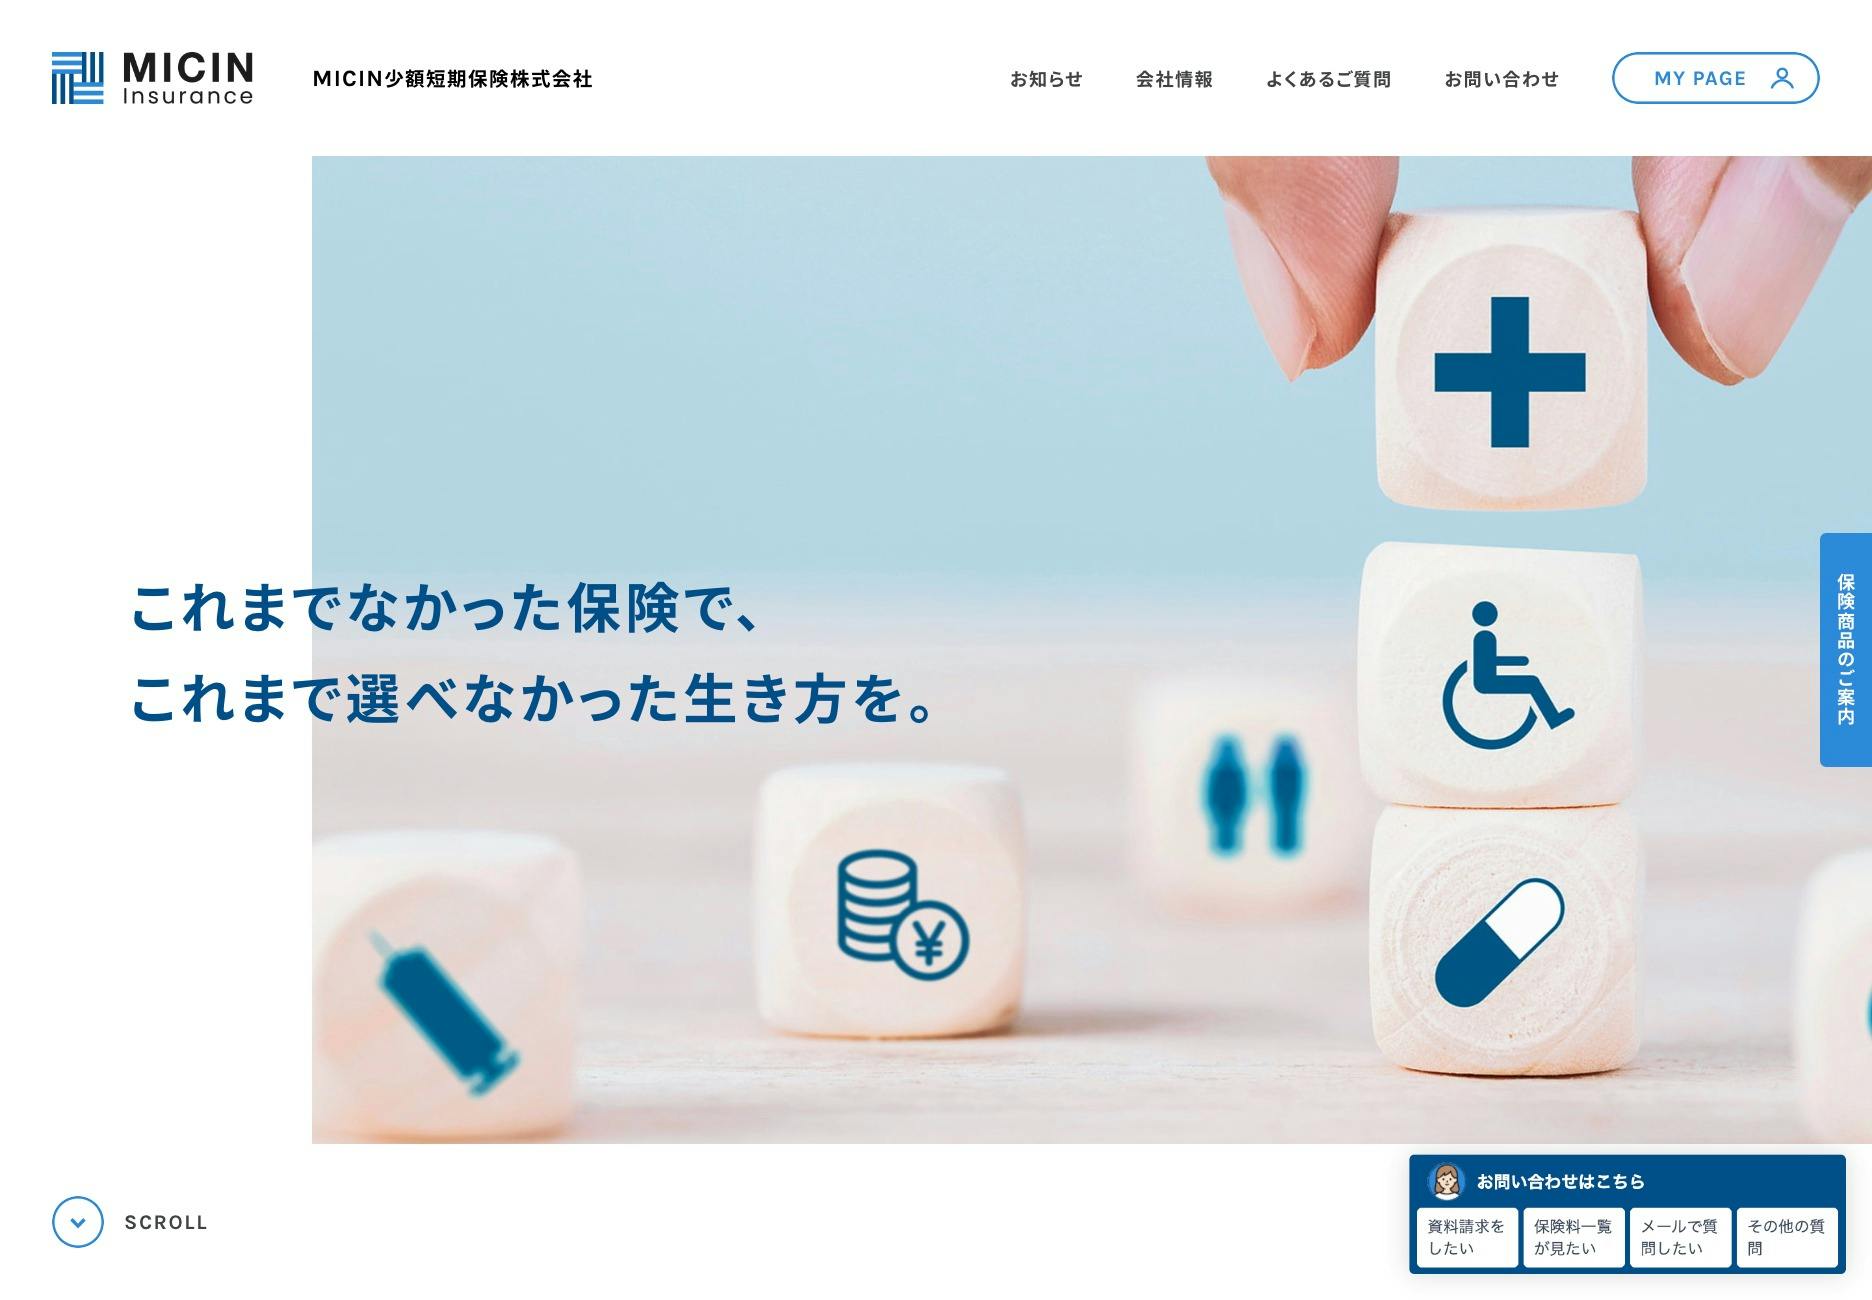 Cover Image for MICIN少額短期保険株式会社 コーポレートサイト